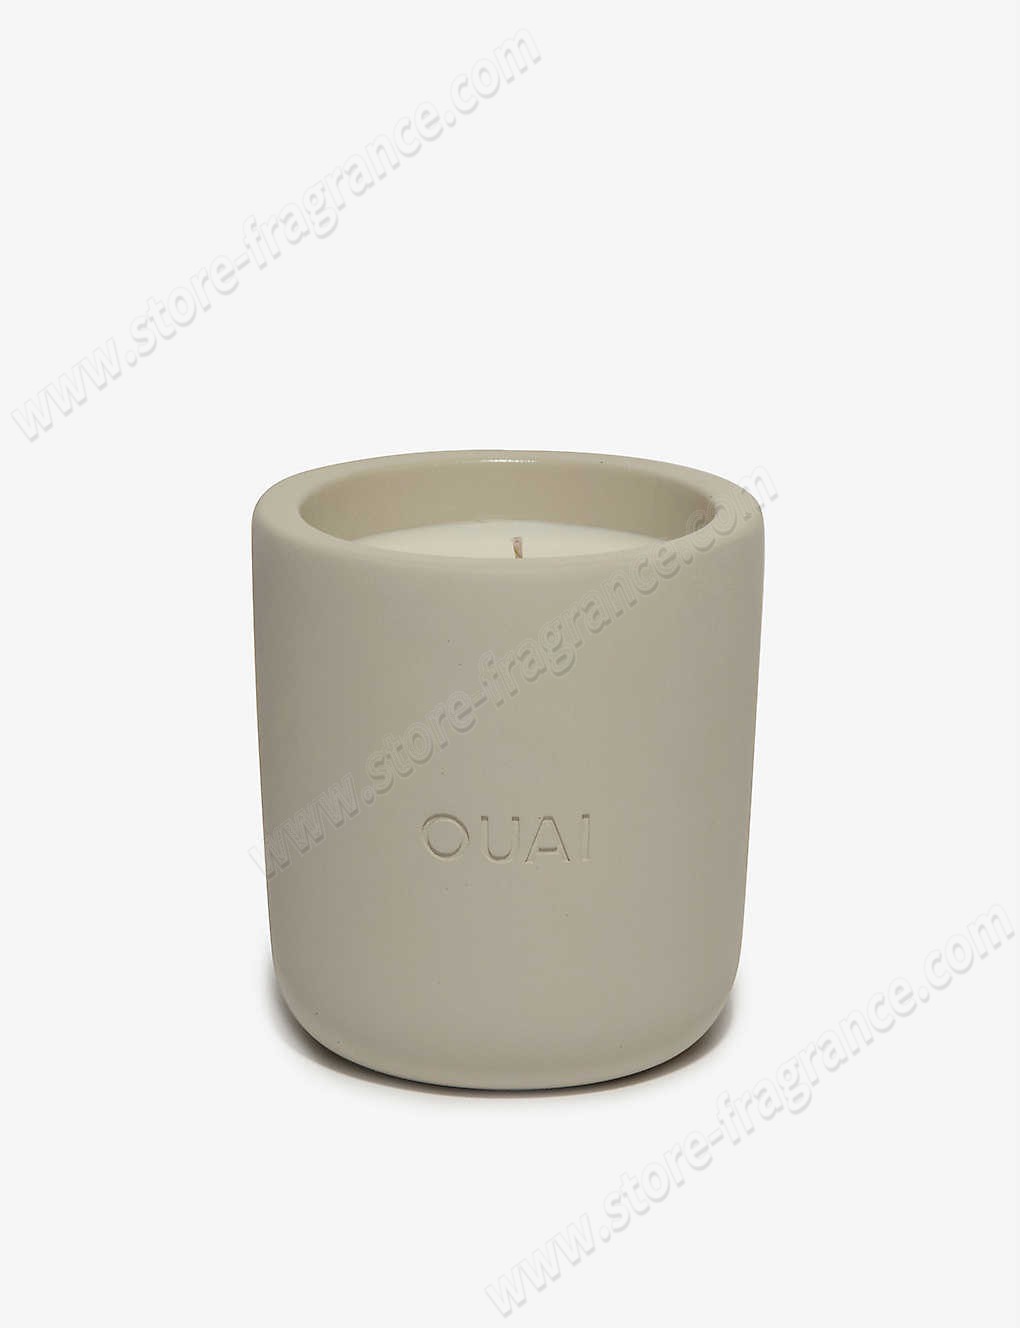 OUAI/North Bondi scented candle 229g ✿ Discount Store - -0